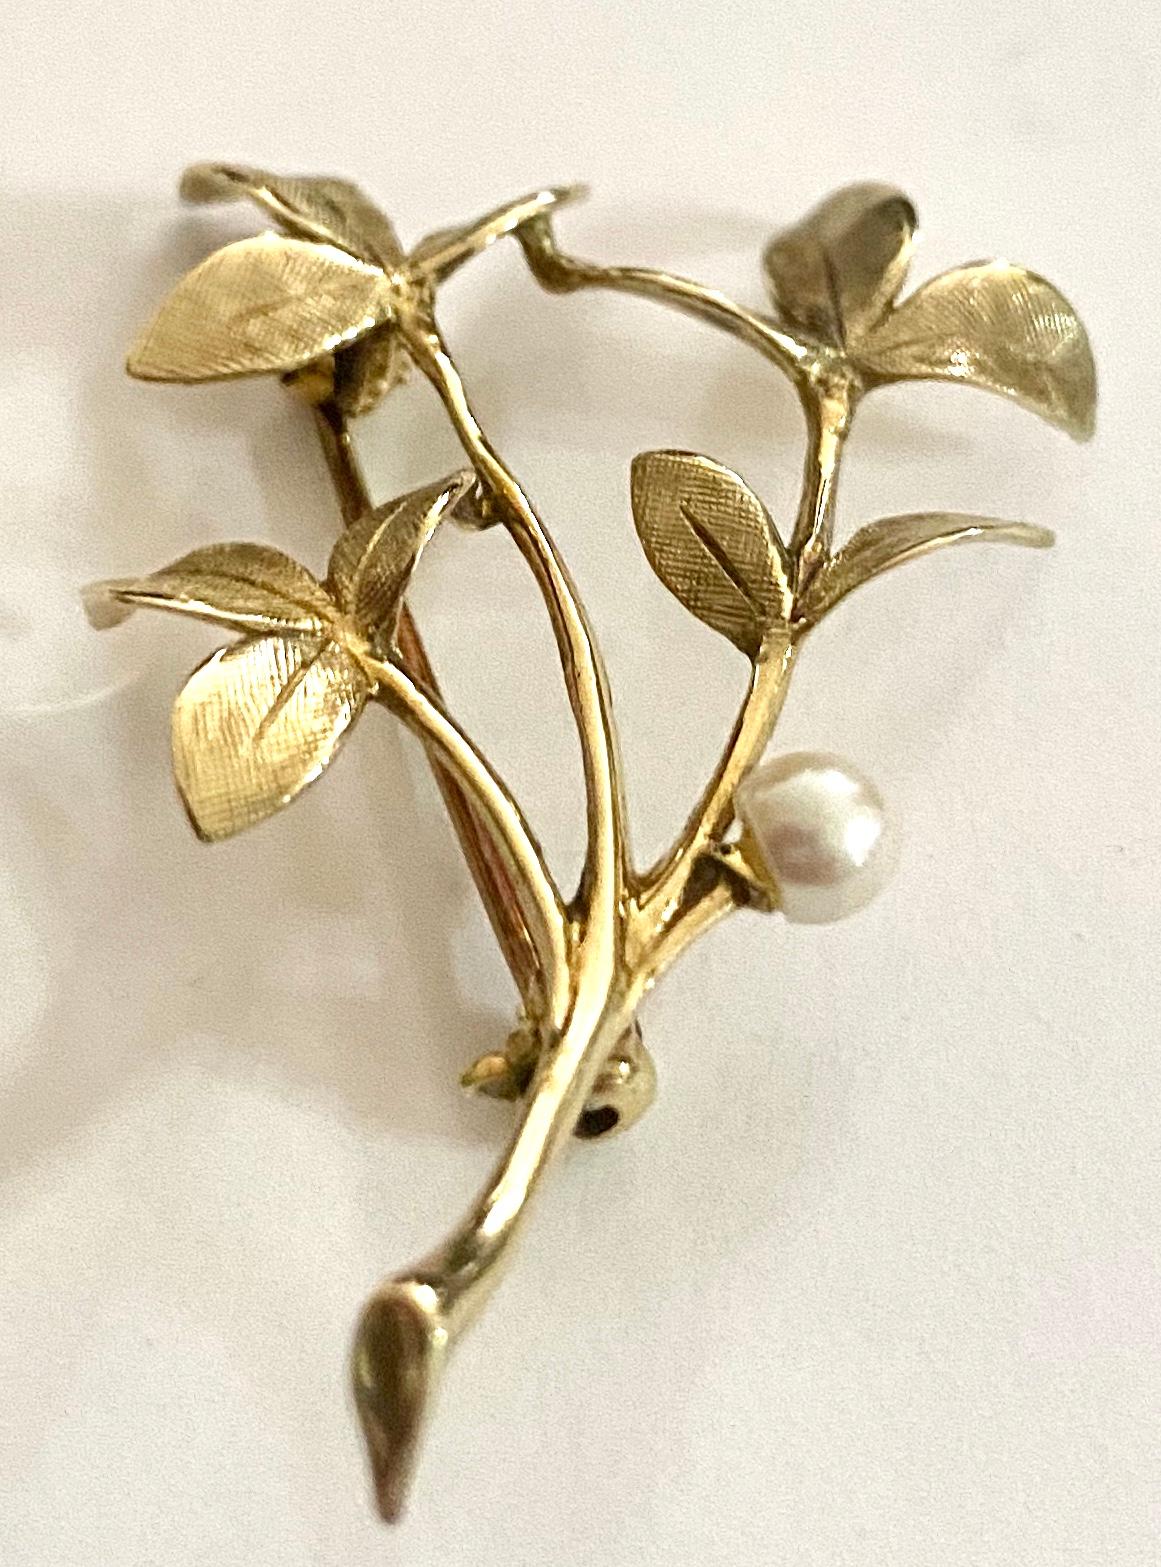 One (1) 14K. Yellow Gold broche with 11 leaves and one natural pearl.
Weight: 3.49 gram
Measurements:   40 x 26 x 3 mm
Gemany ca 1950
(Including AGTL certificate of the jewel)